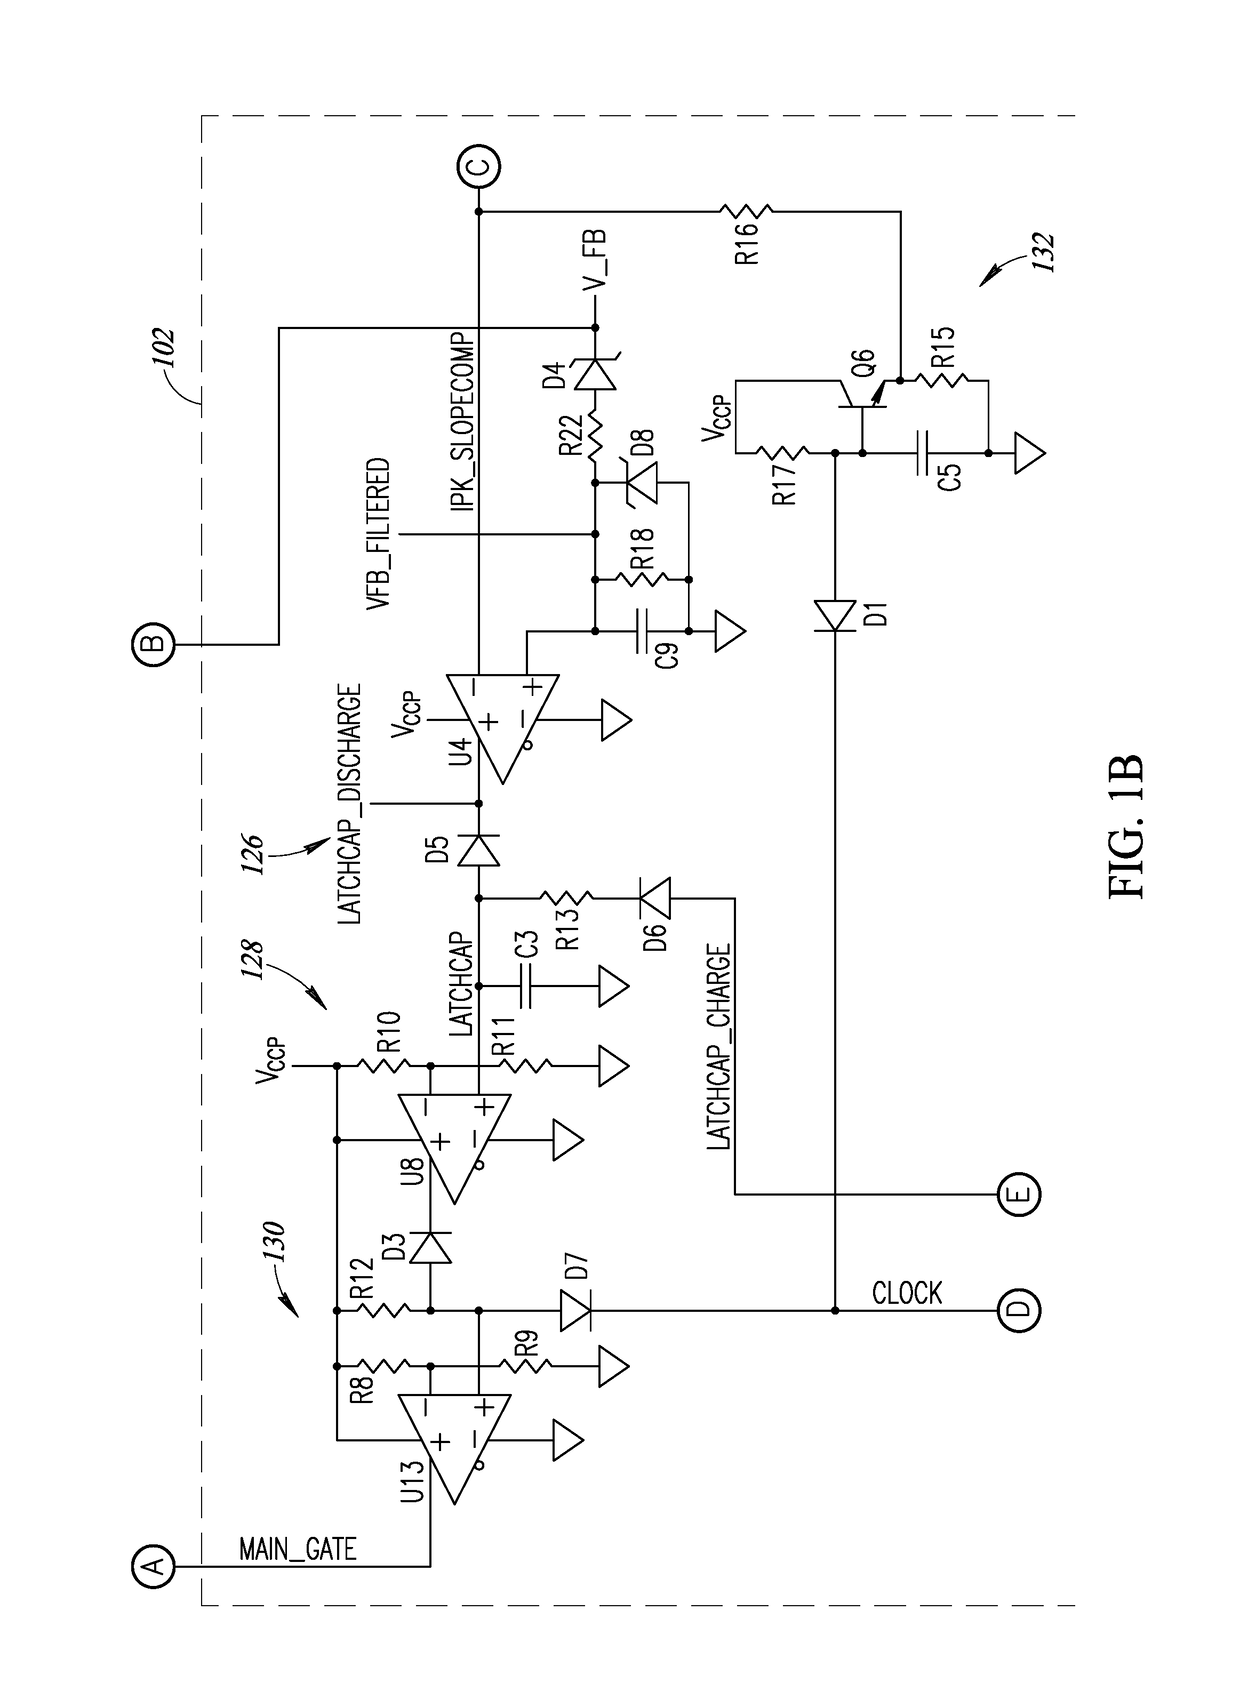 Radiation tolerant, analog latch peak current mode control for power converters